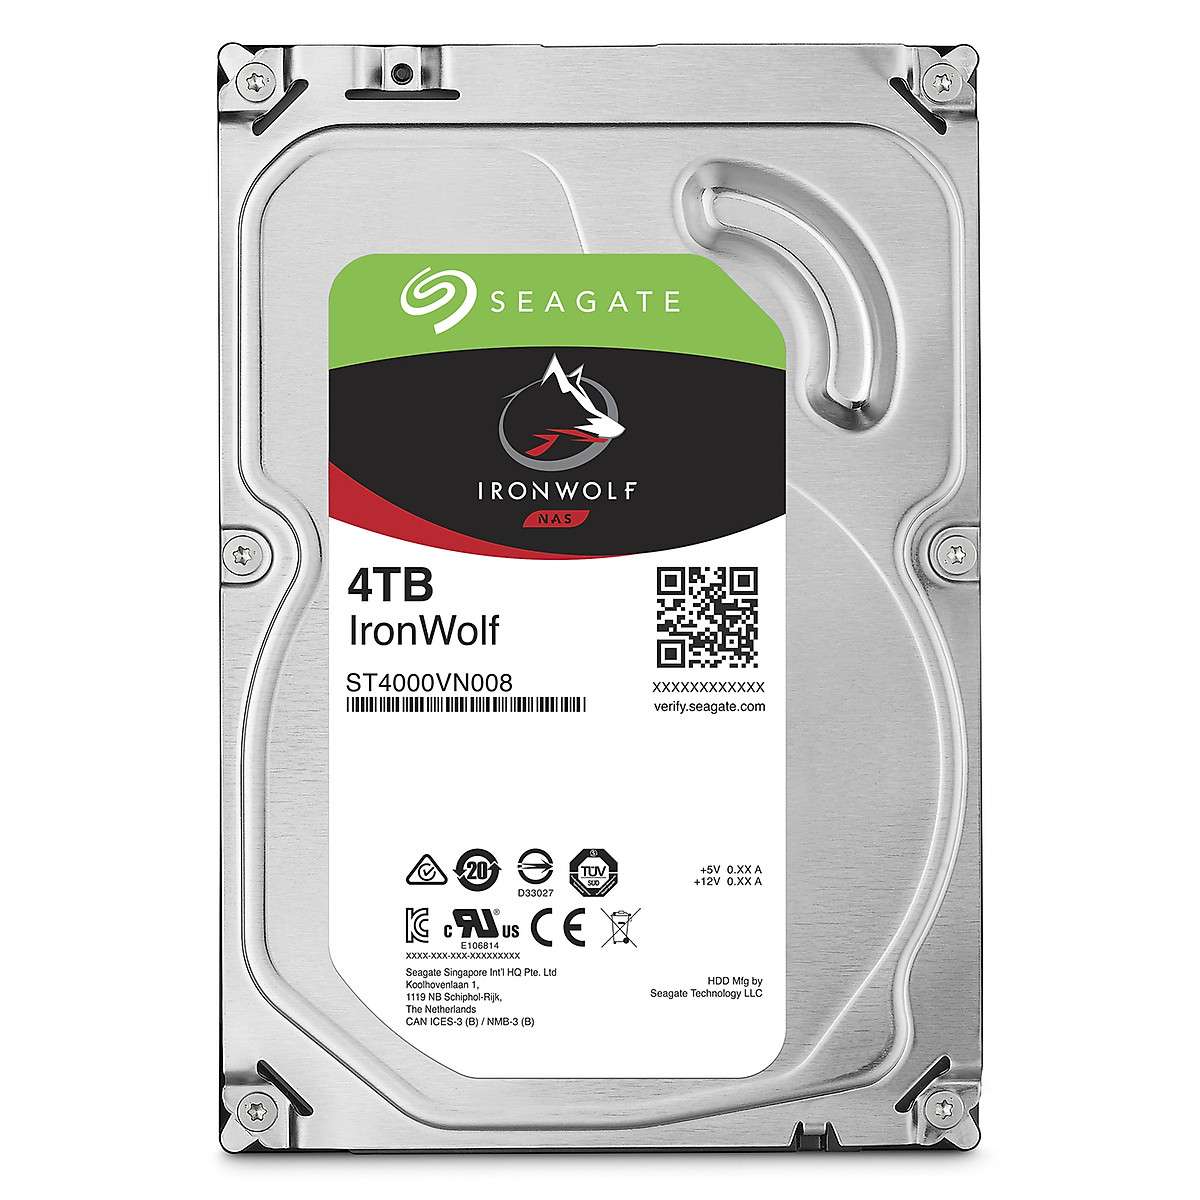 HDD Seagate IronWolf 4TB 3.5 inch SATA III 64MB Cache 5900RPM ST4000VN008